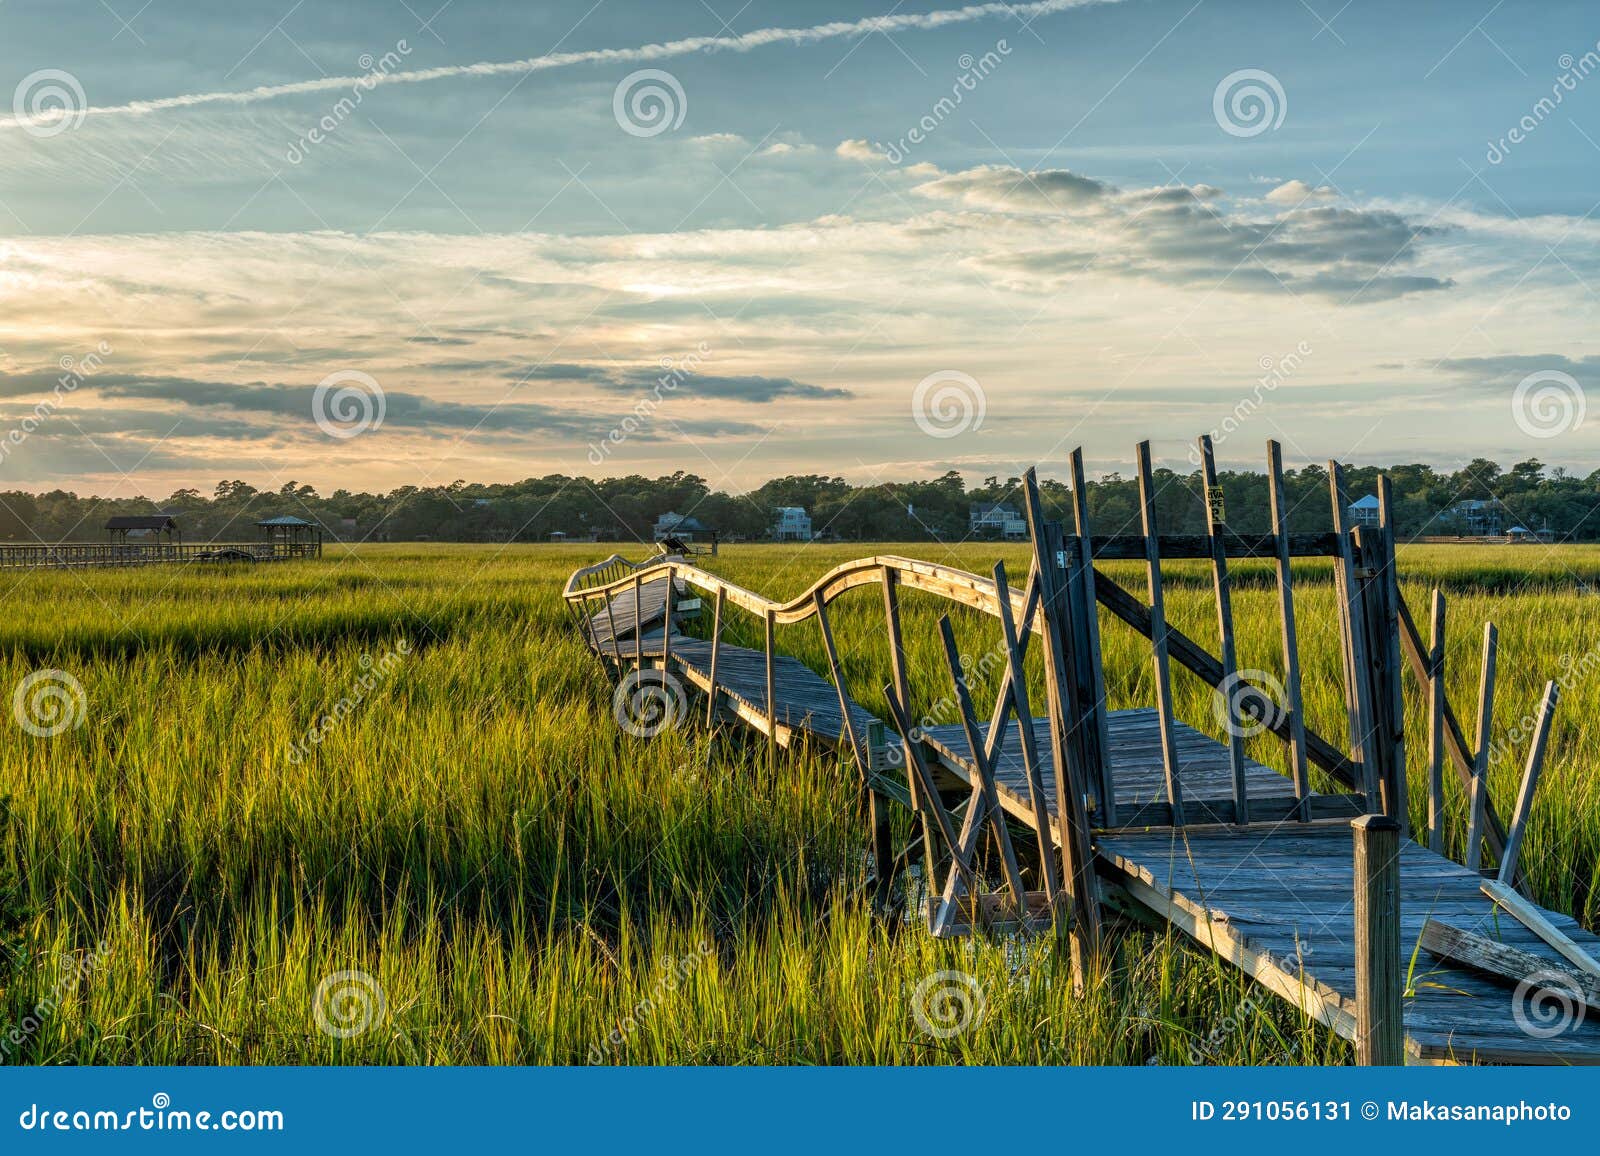 old dilapidated wooden dock in the marshgrass and inlet of palweys island in south carolina